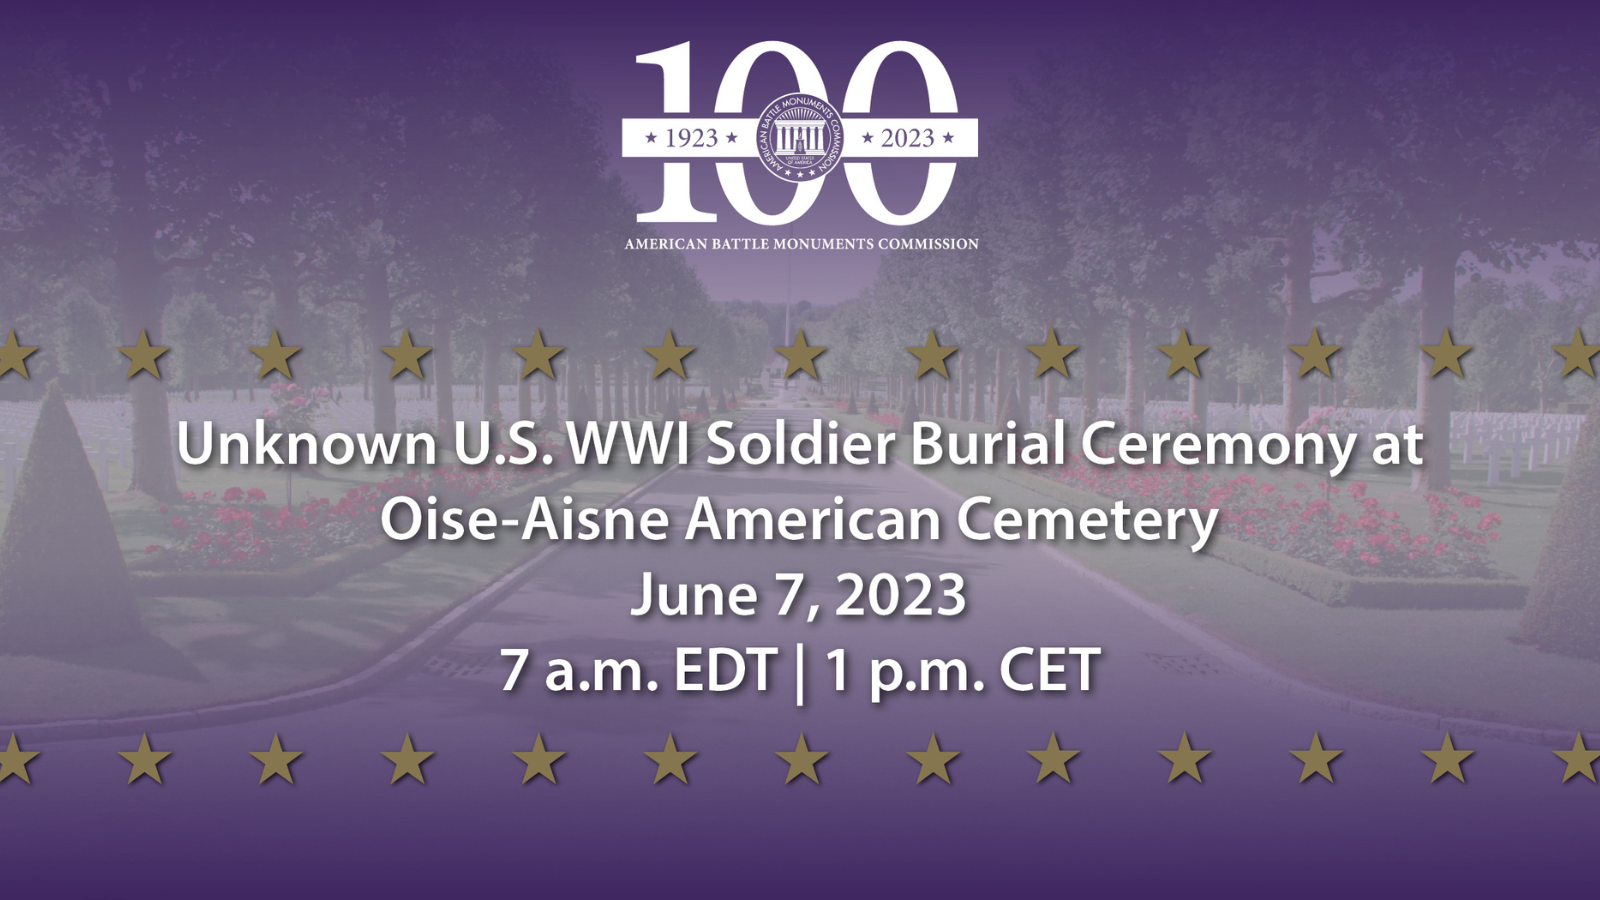 WWI soldier Burial ceremony announcement